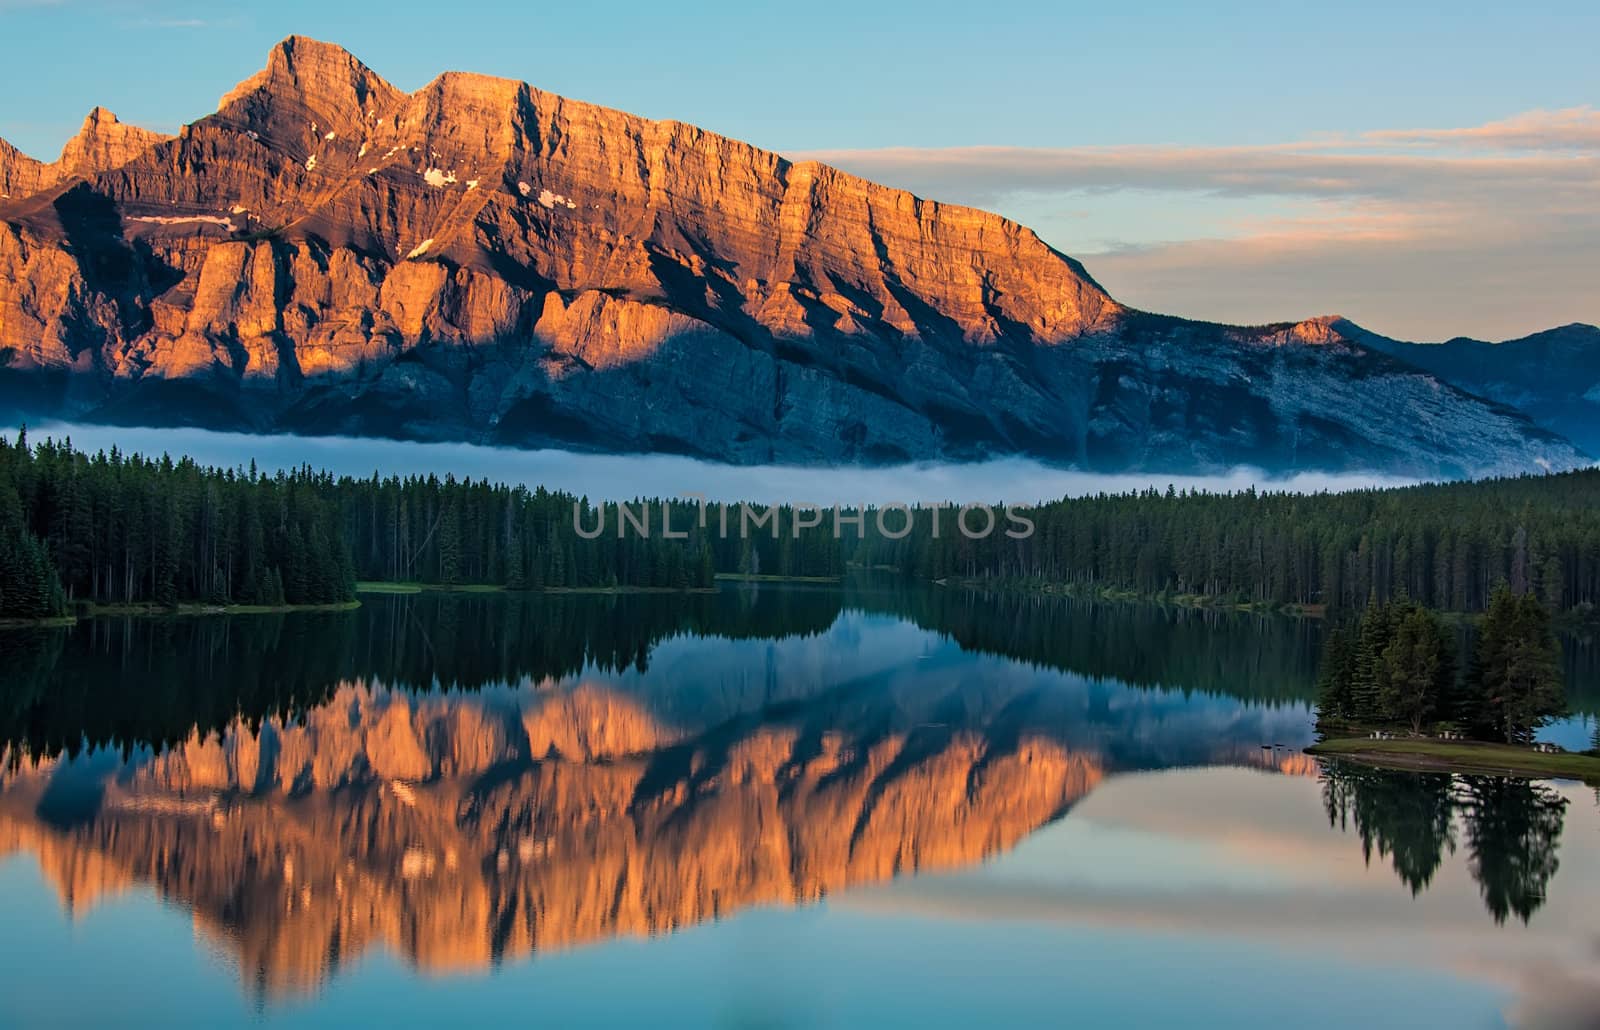 View across two jack lake from Lake Minnewanka Scenic Drive at sunrise in Banff National Park.